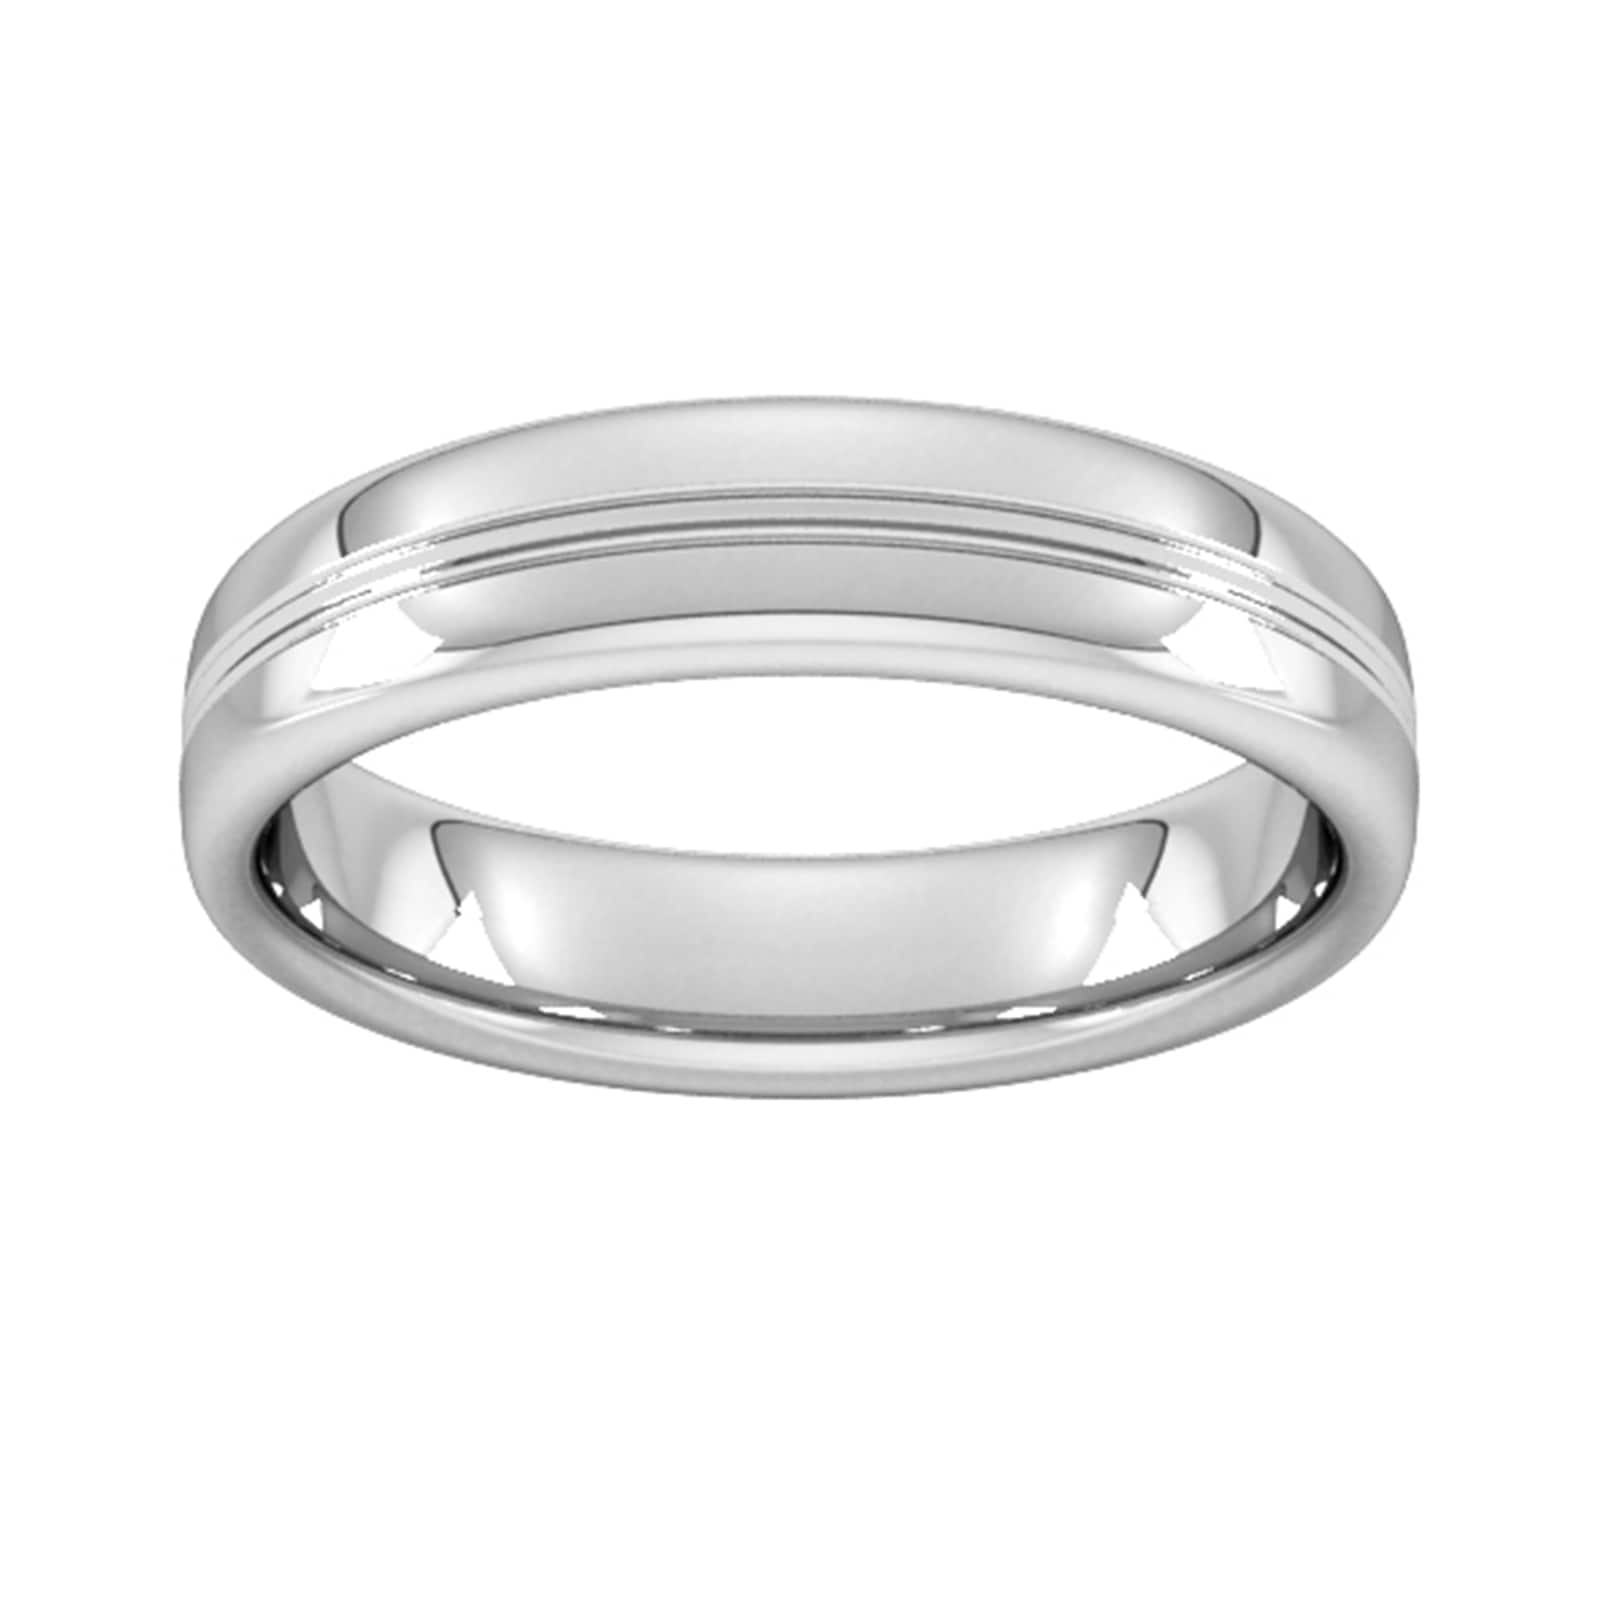 5mm Slight Court Standard Grooved Polished Finish Wedding Ring In 18 Carat White Gold - Ring Size W